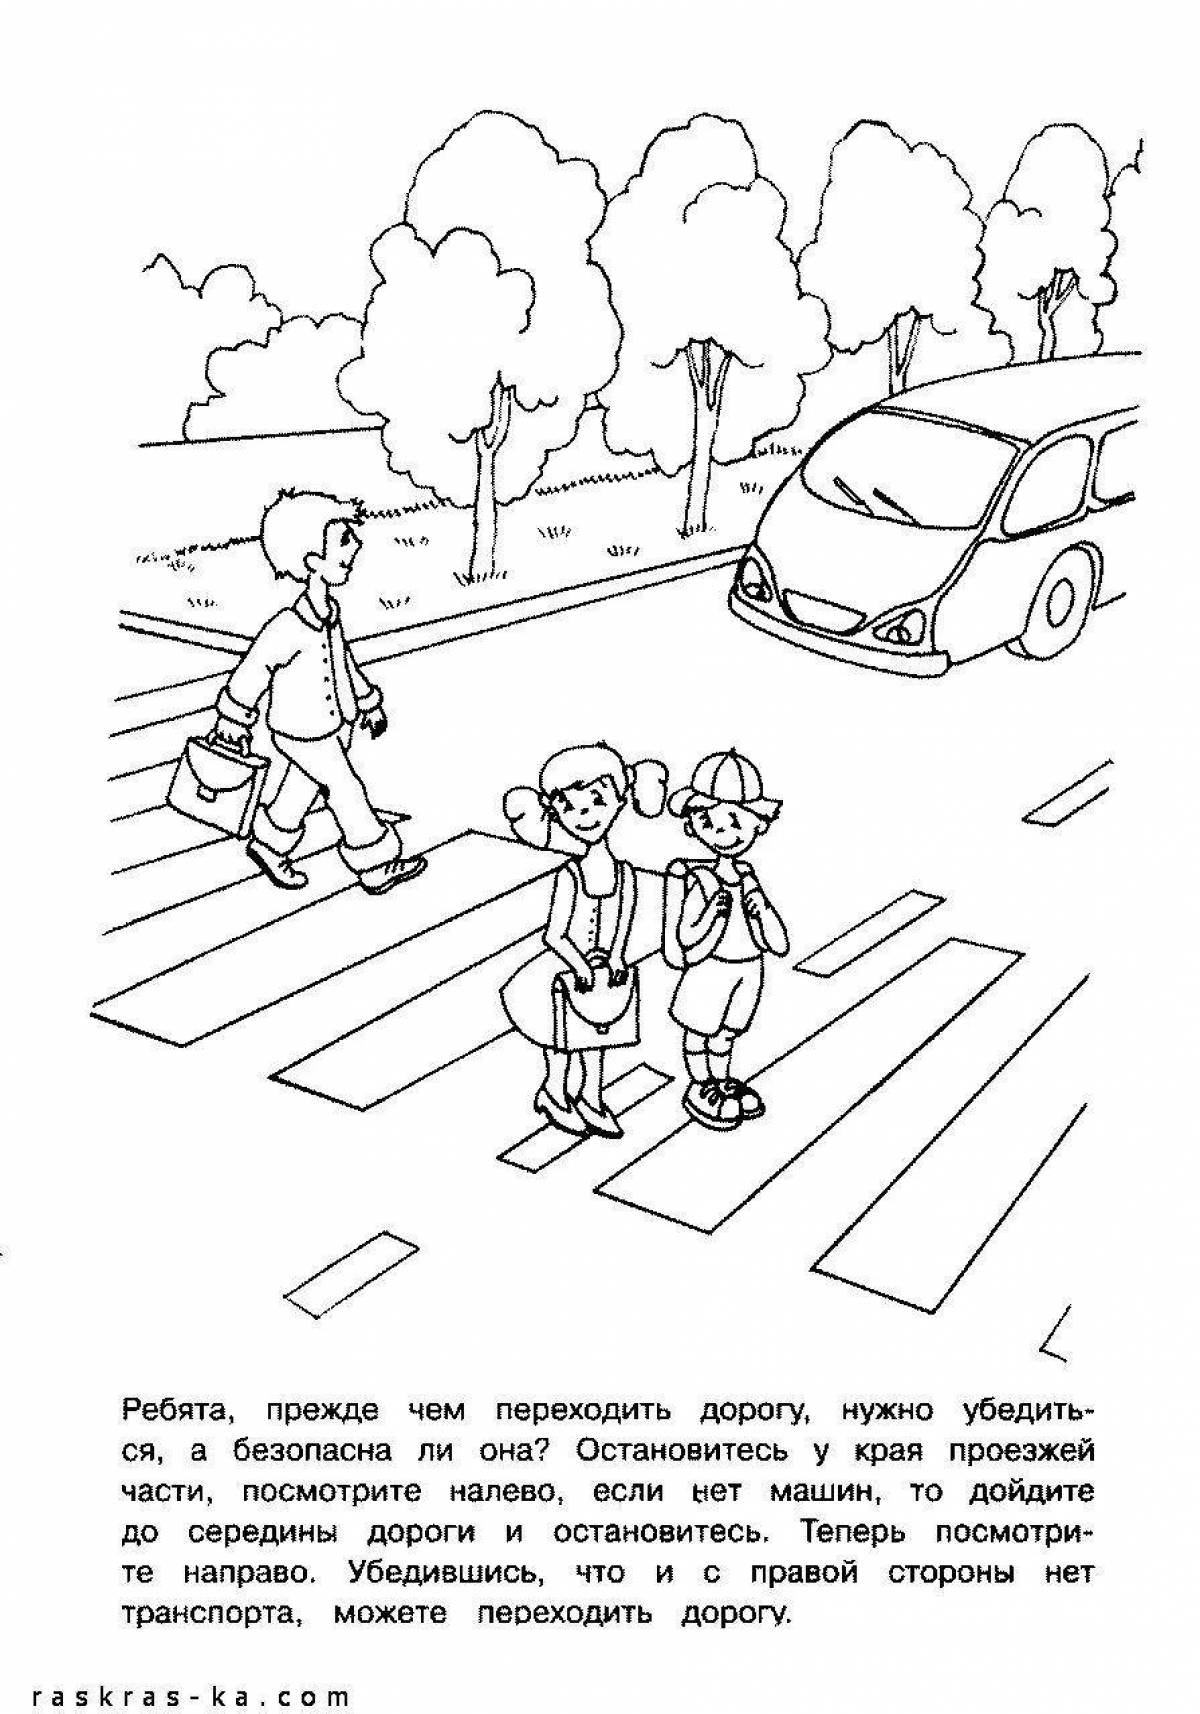 Pleasant road safety coloring book